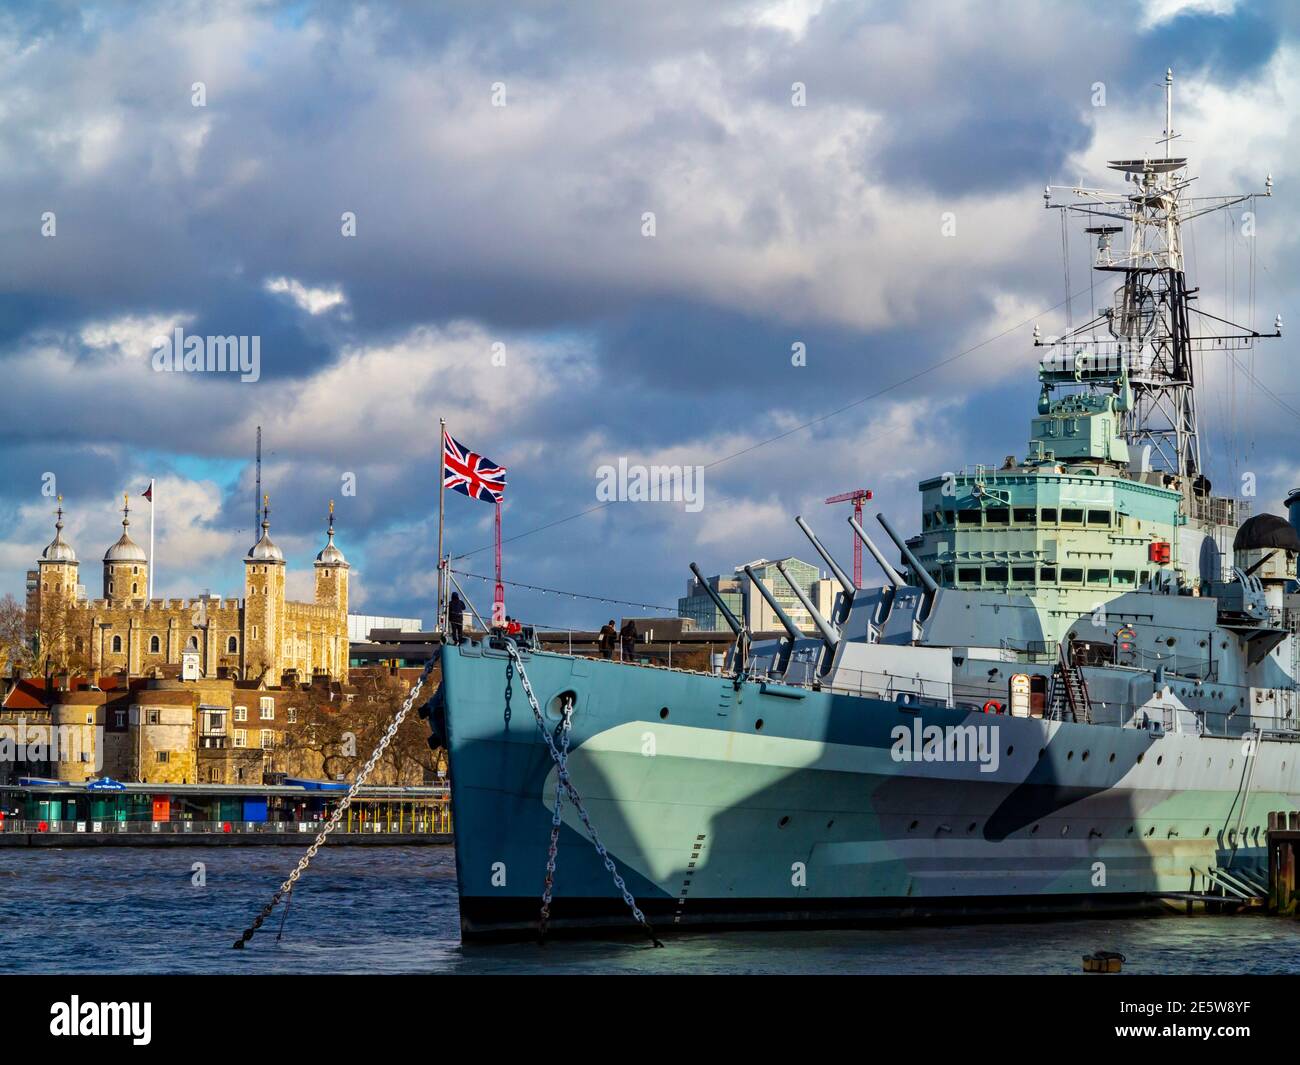 HMS Belfast a British Royal Navy Town Class light cruiser launched in 1936 now a floating museum ship on the River Thames in London England UK Stock Photo